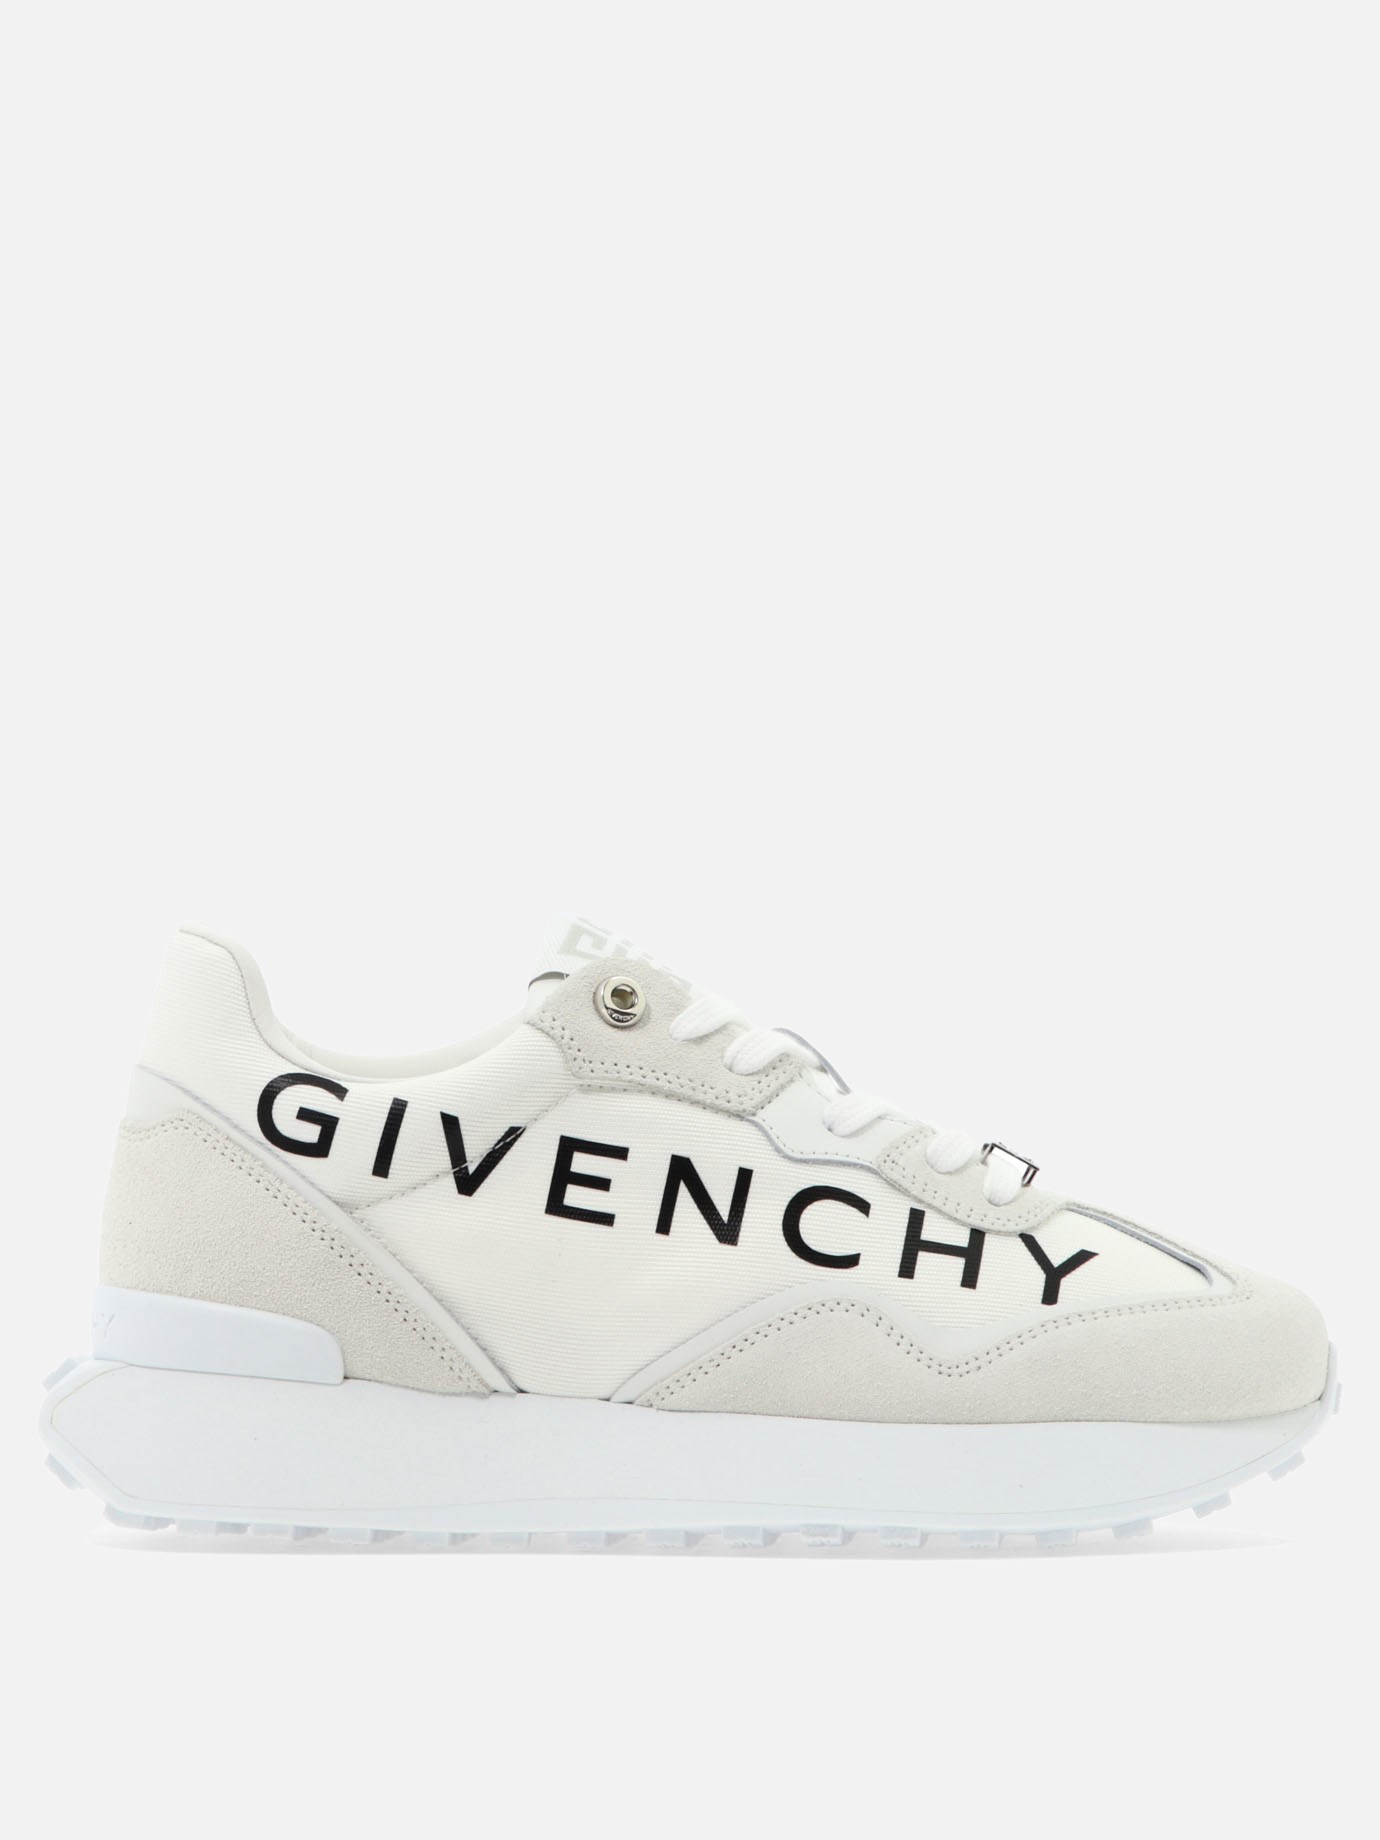  Giv Runner  sneakersby Givenchy - 1